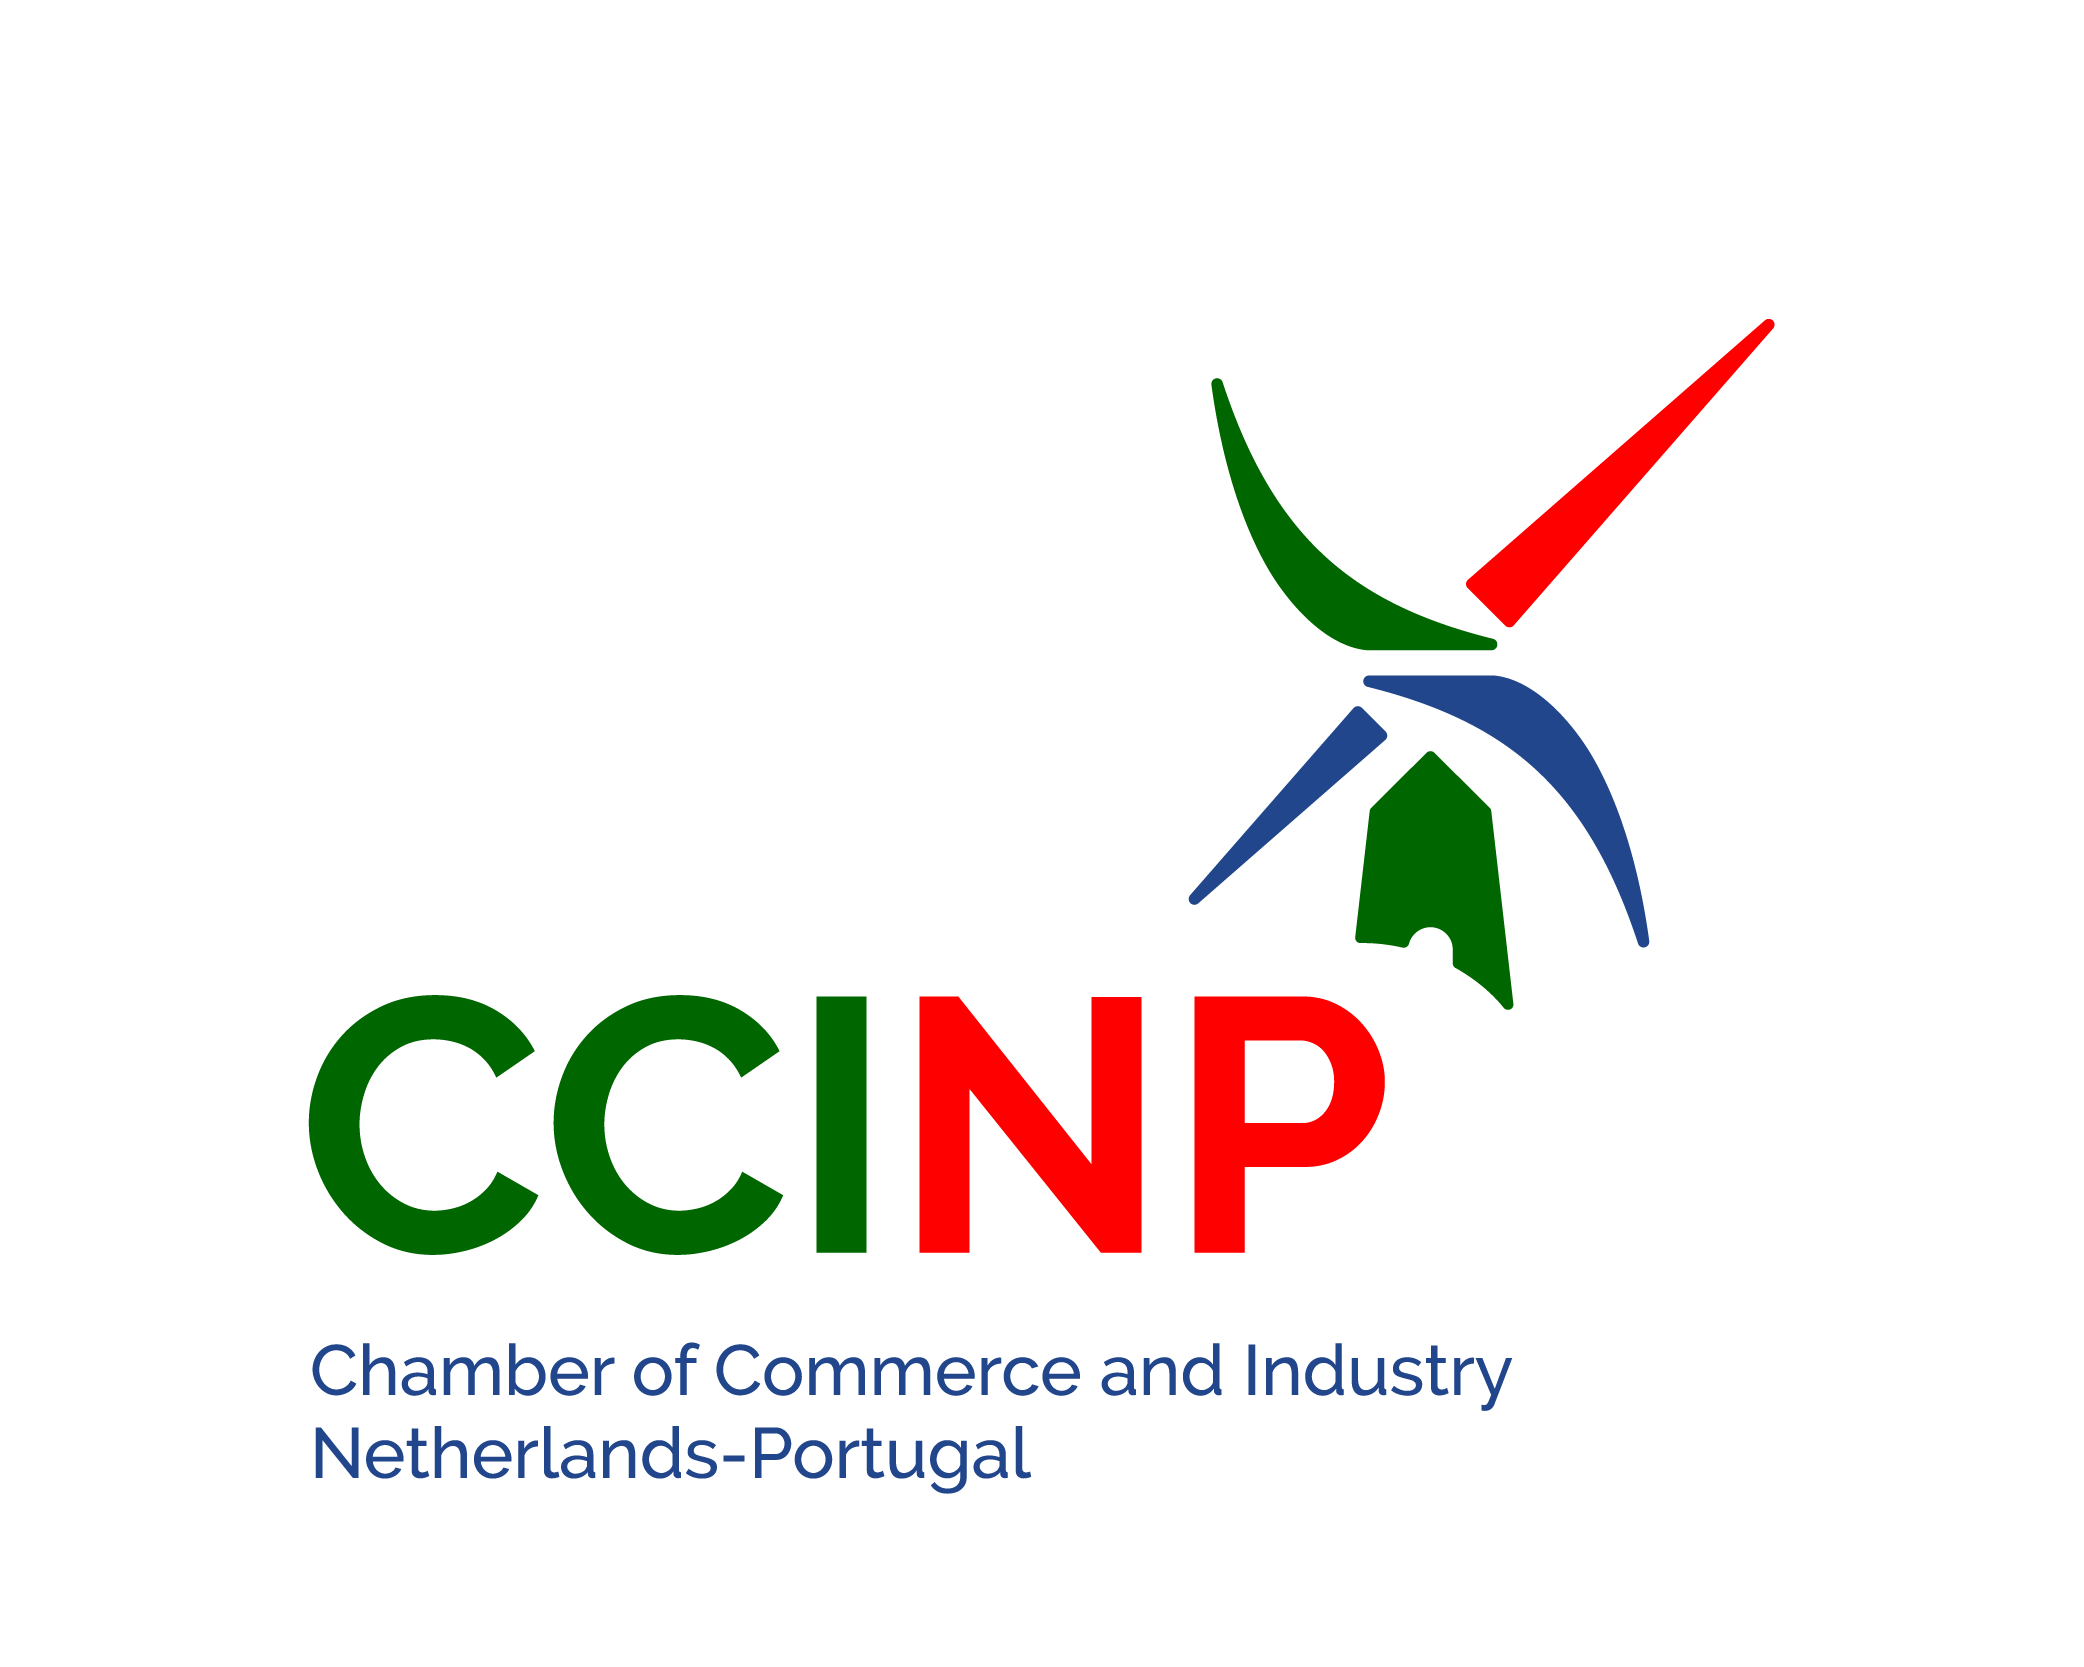 Chamber of Commerce and Industry Netherlands-Portugal